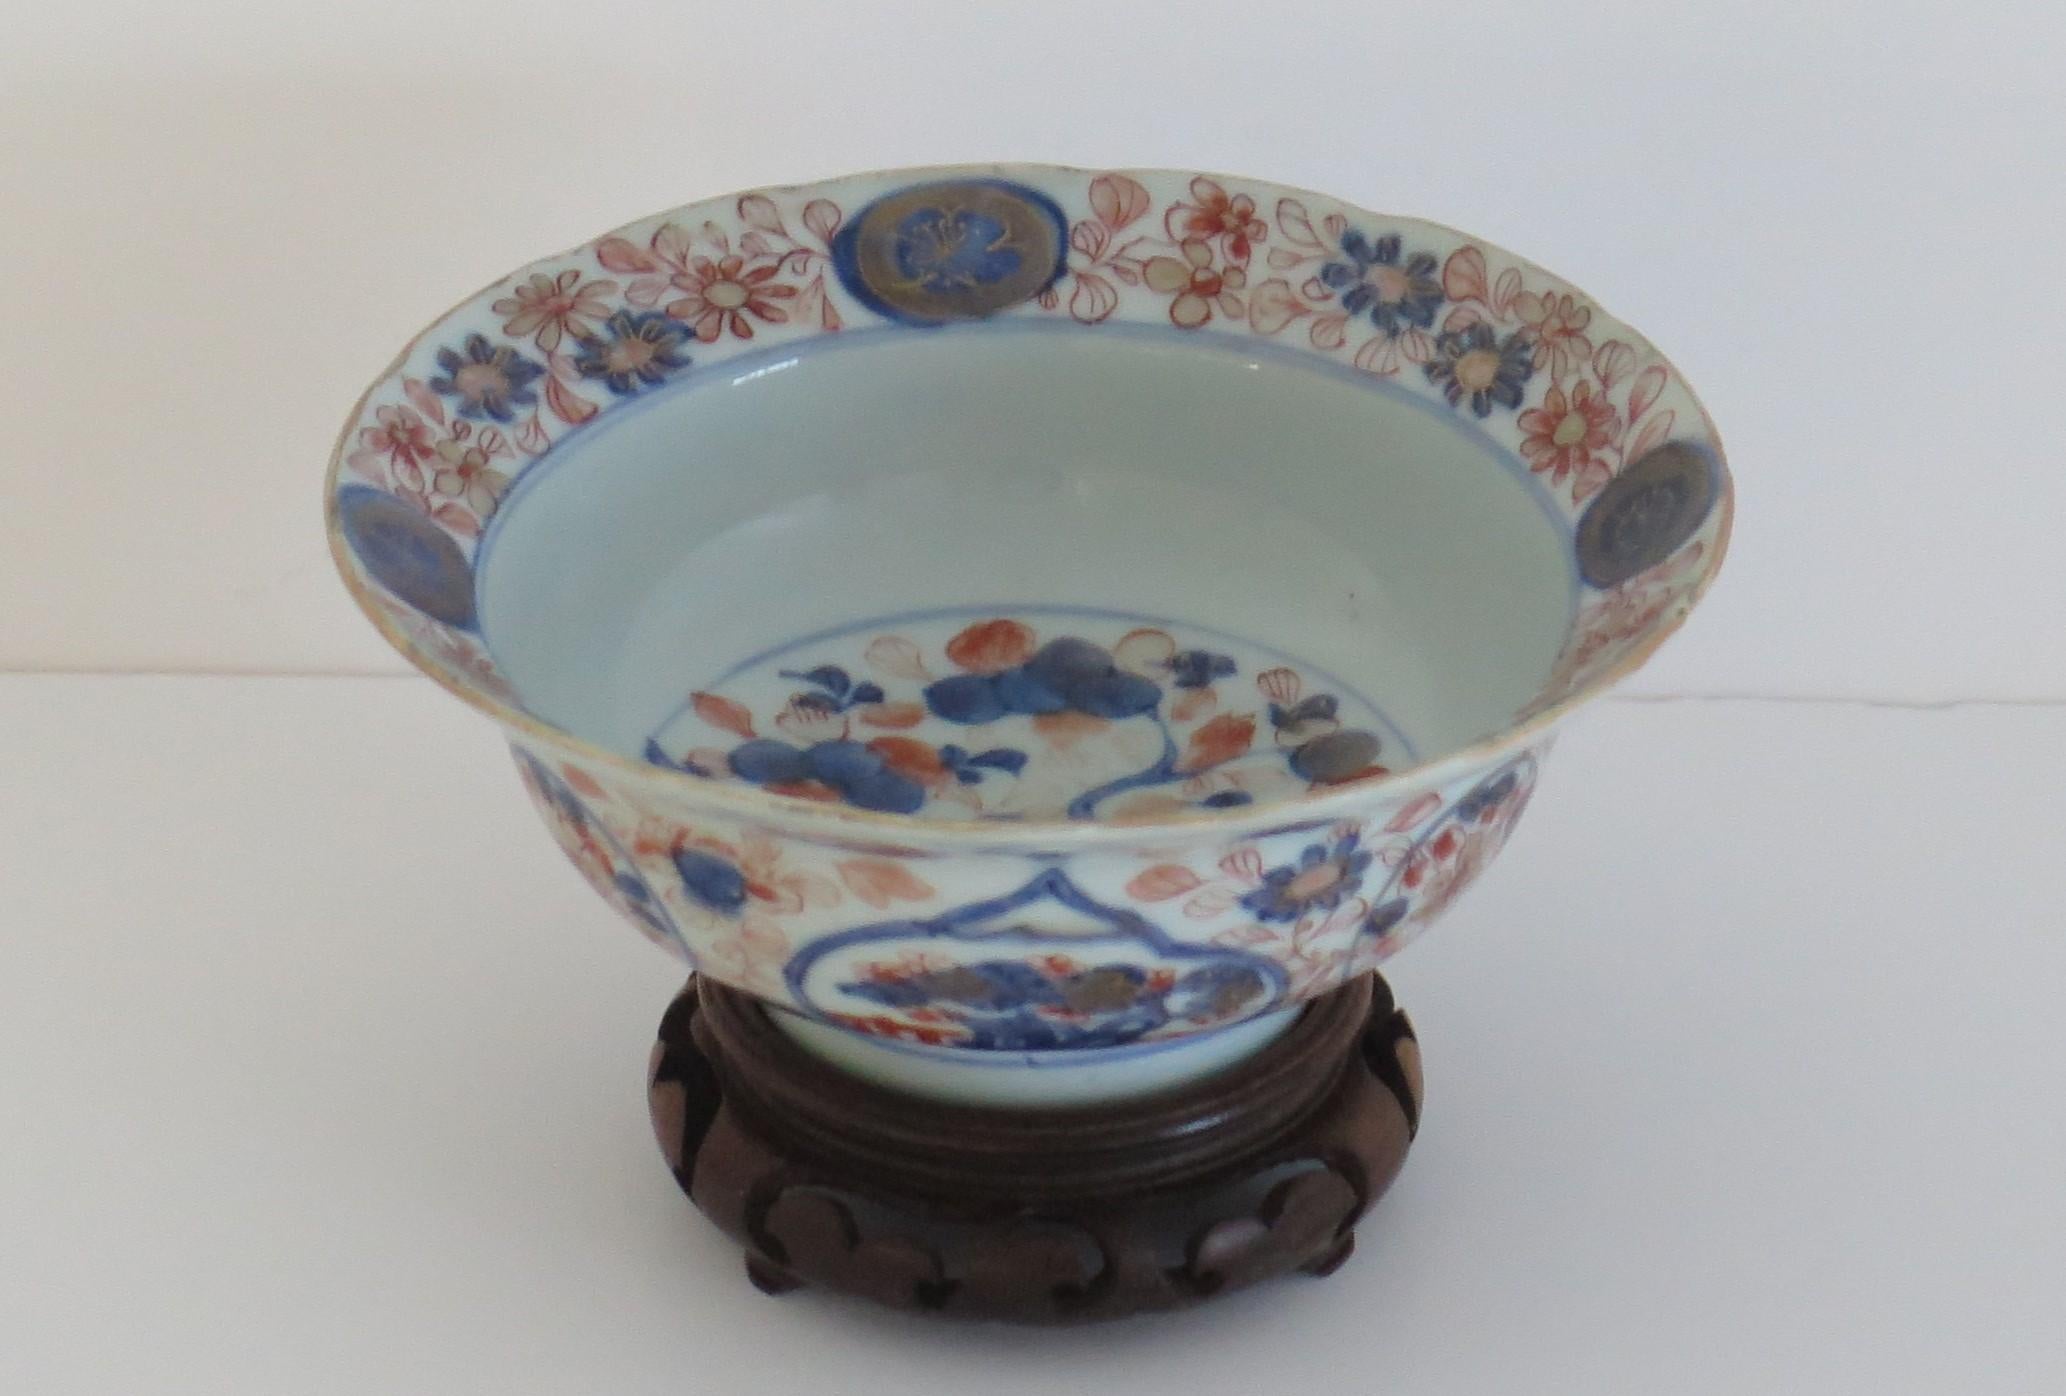 This is a beautiful Chinese Export porcelain footed Bowl with fine Imari hand painted decoration, dating to the Qing, Kangxi period, circa 1700. The bowl comes with a Chinese hardwood stand. 

This bowl is finely potted on a fairly high foot and